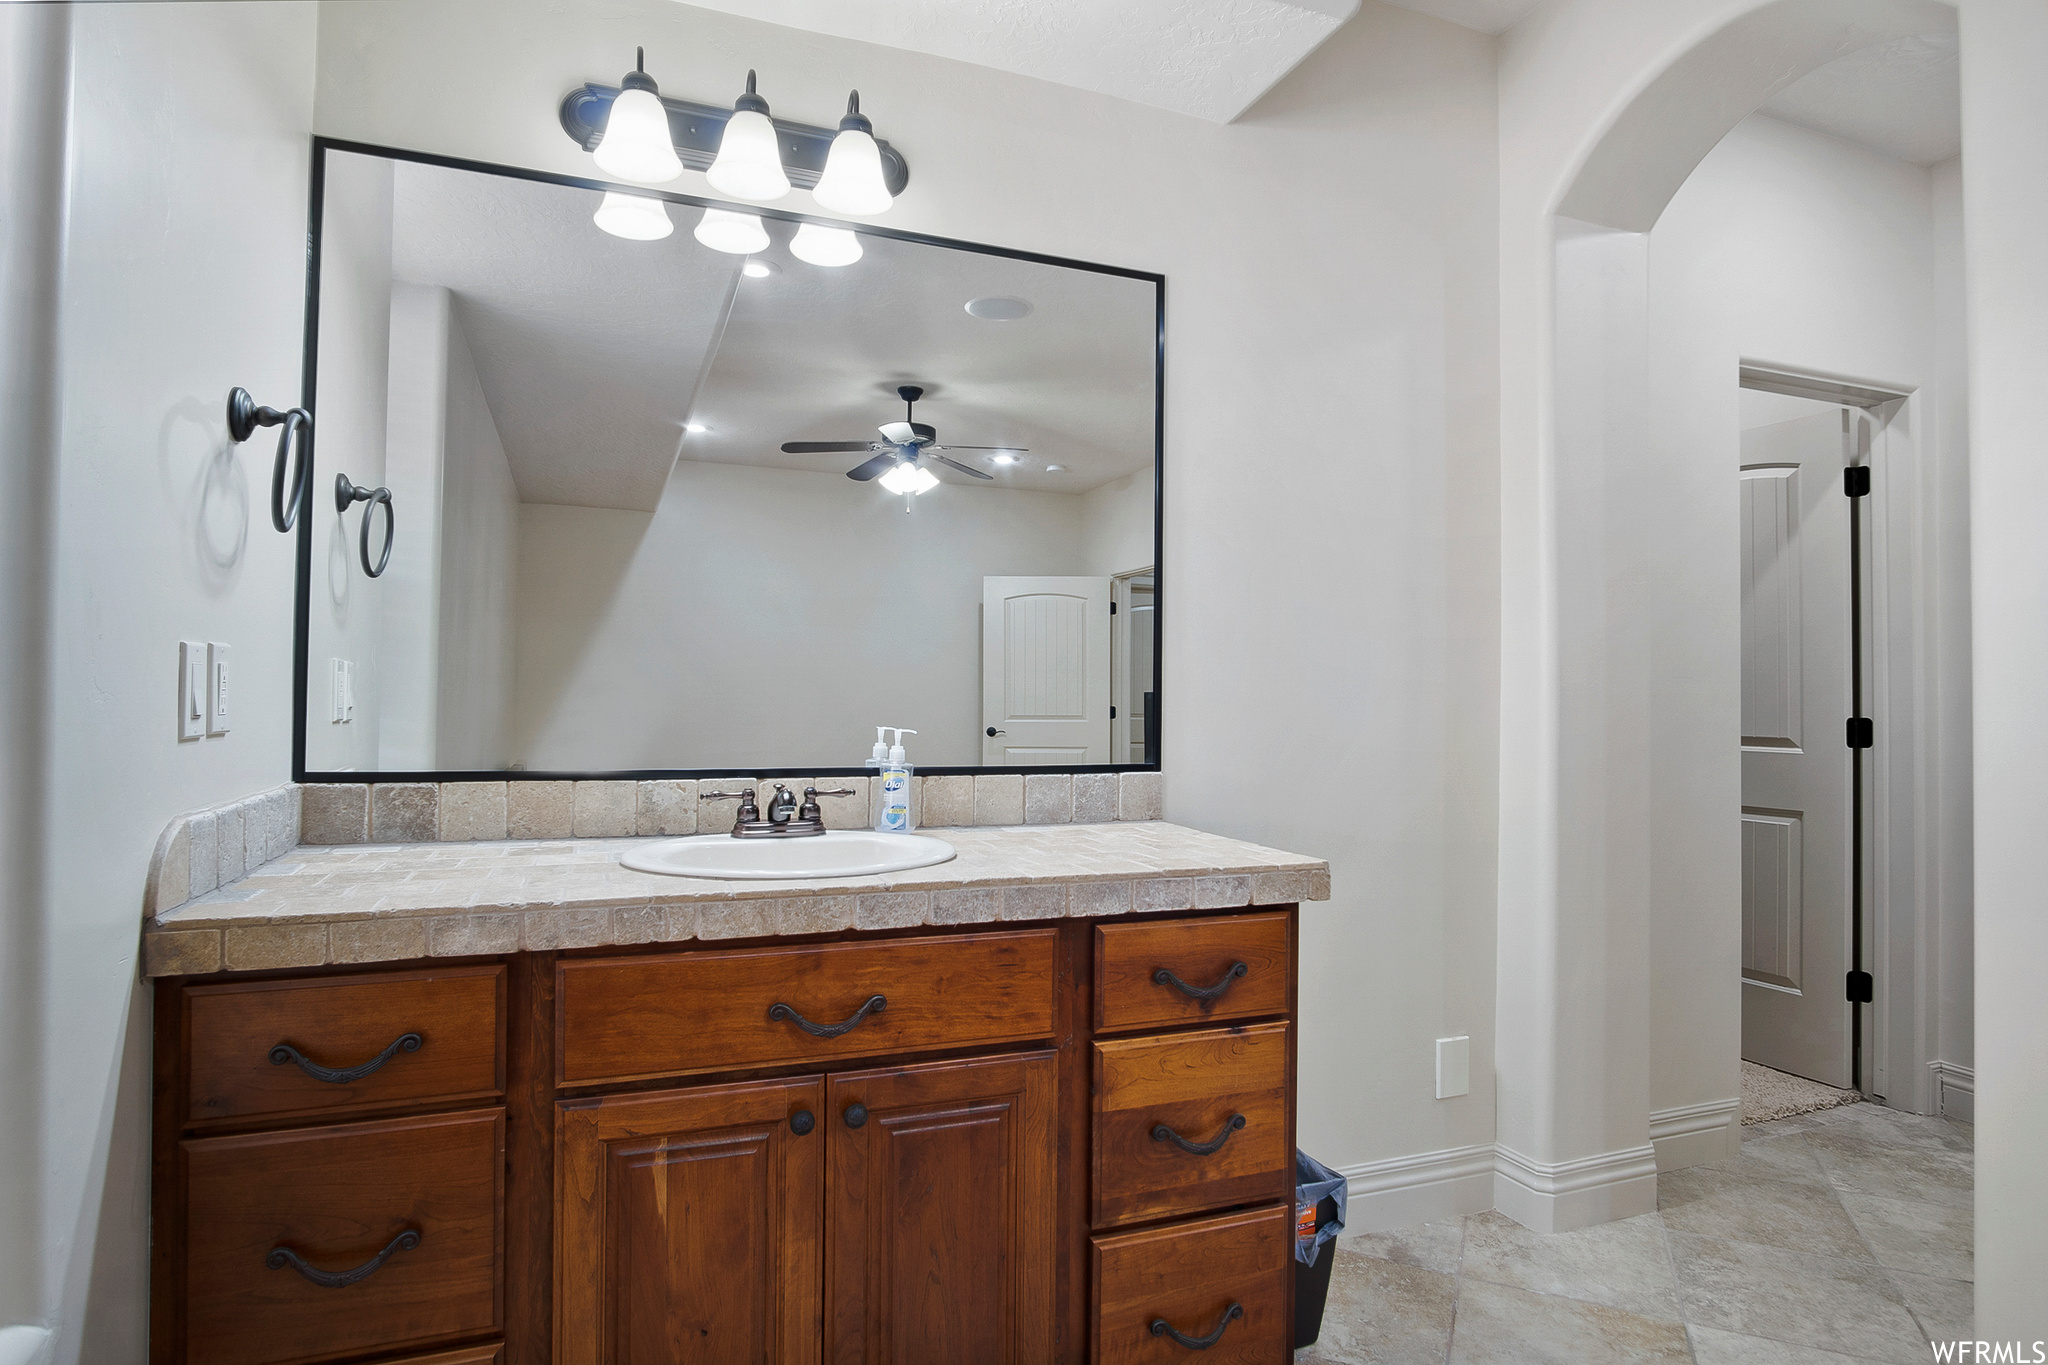 Bathroom with tile flooring, a ceiling fan, vanity with extensive cabinet space, and mirror